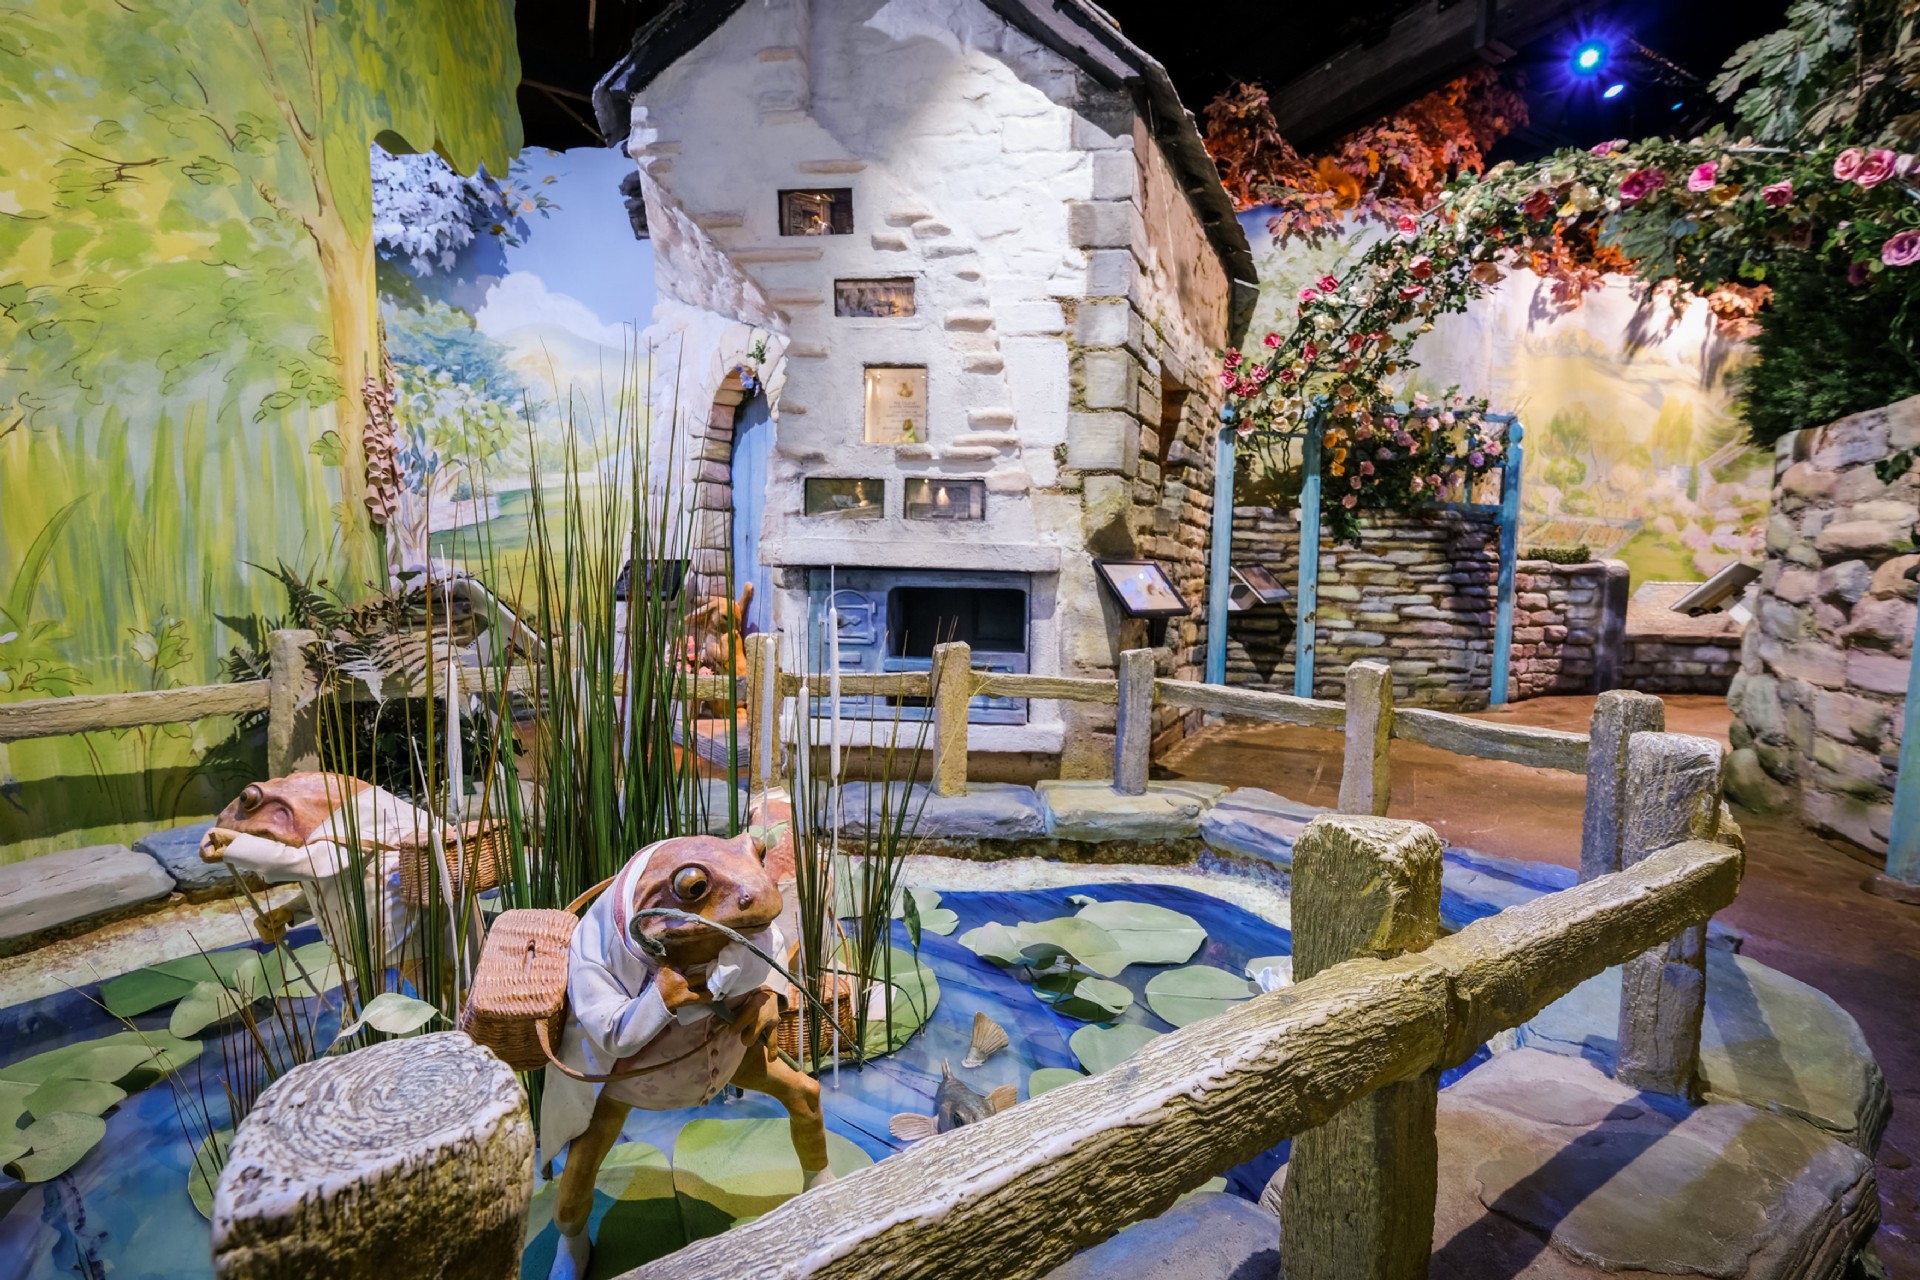 <p><strong>We have exciting news for Peter Rabbit fans! </strong></p><p>When you book a holiday cottage stay between 22 March and 14 April, you will receive a free family ticket to visit our friends at the World of Beatrix Potter.